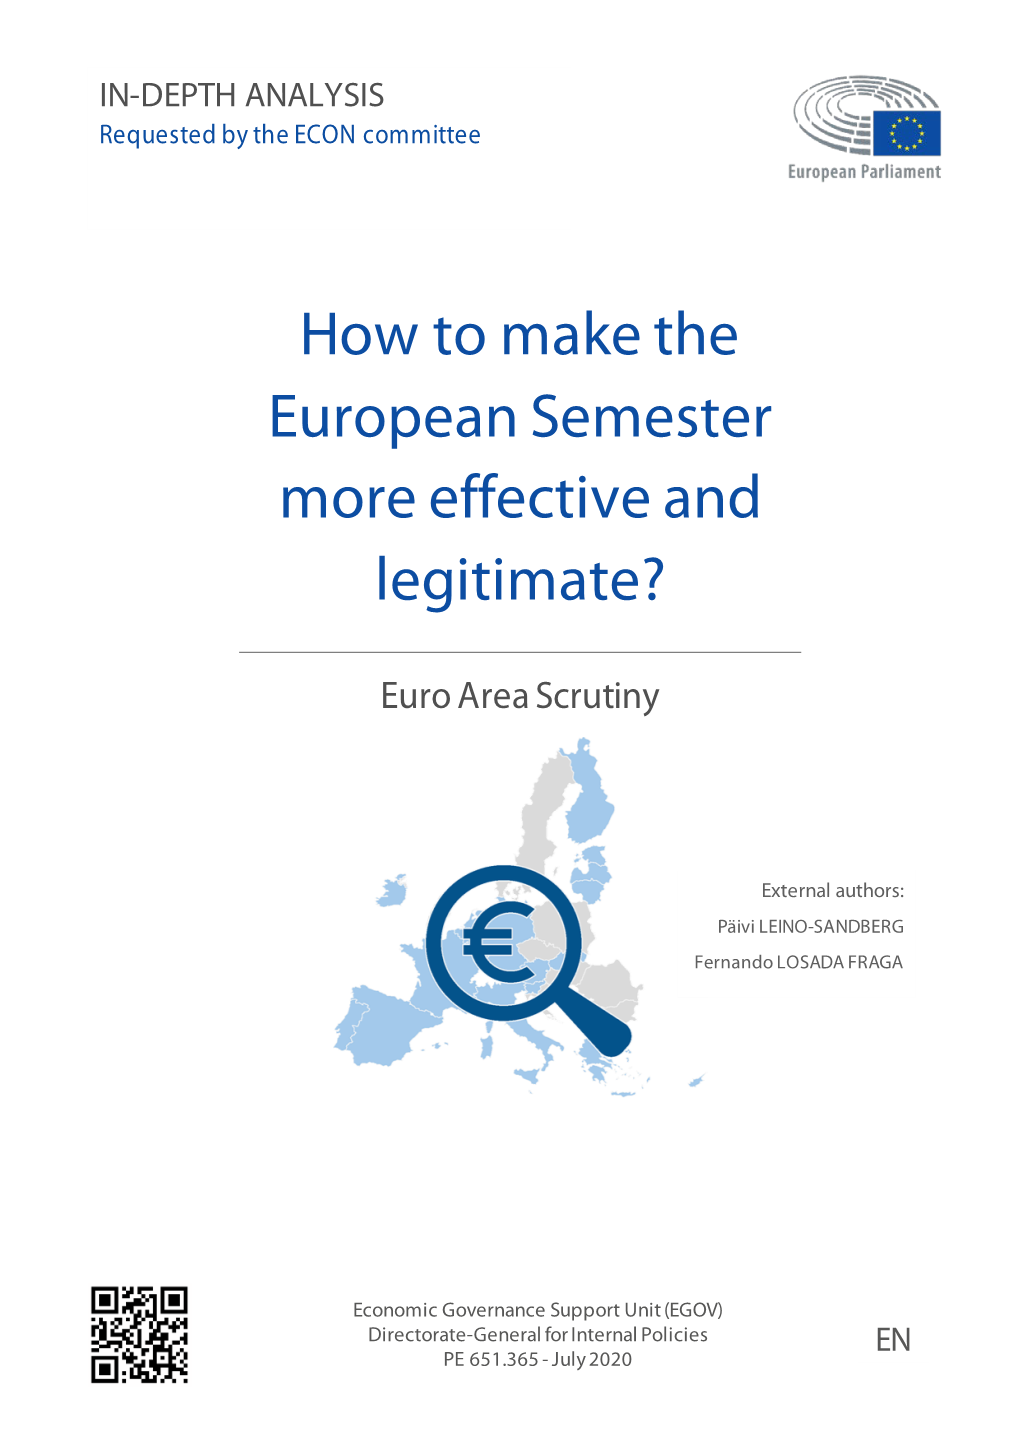 How to Make the European Semester More Effective and Legitimate?